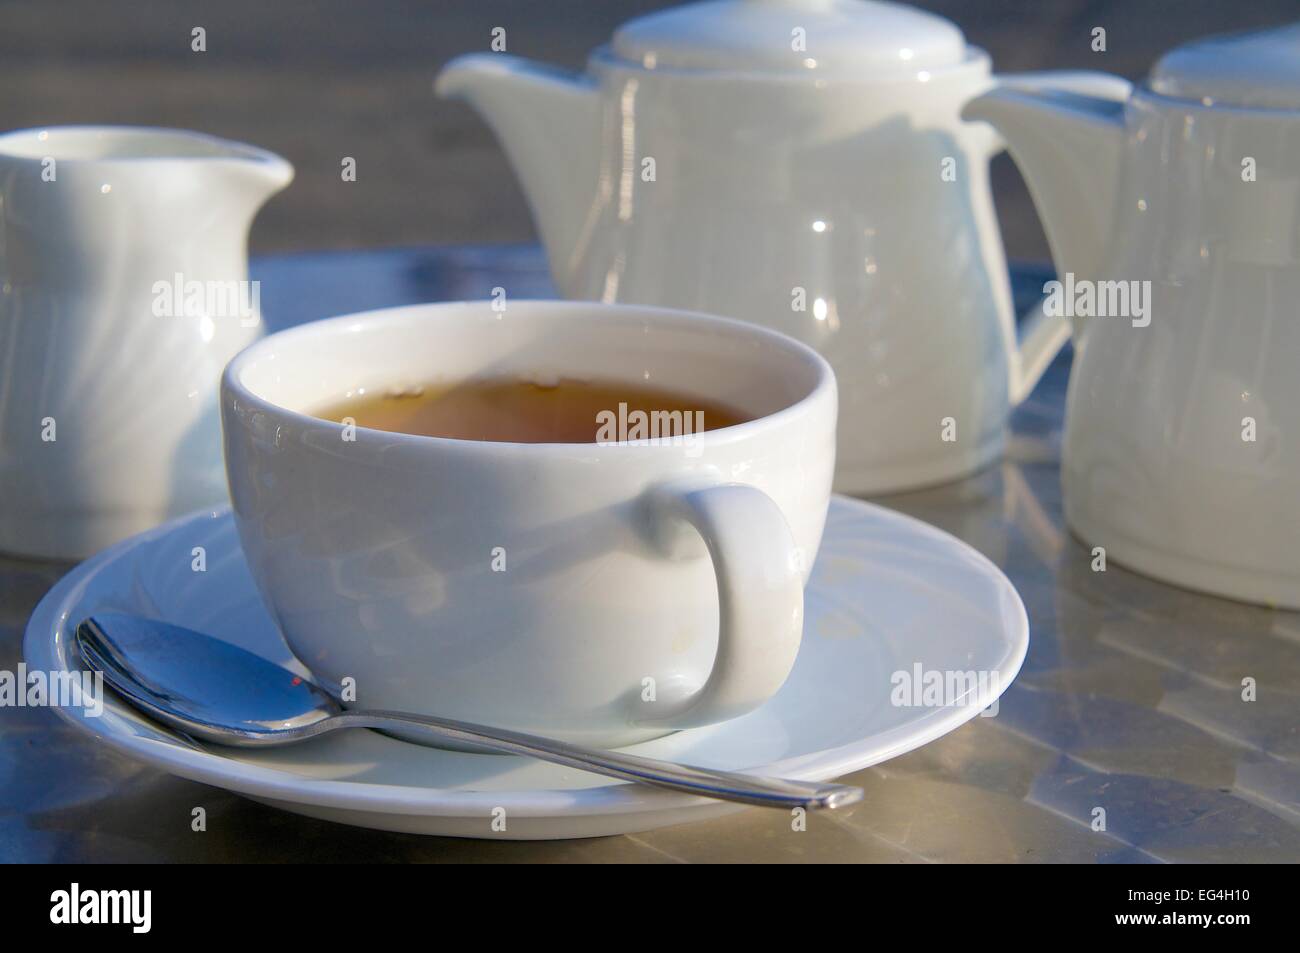 Cup of tea and tea pot on stainless steal table. Stock Photo